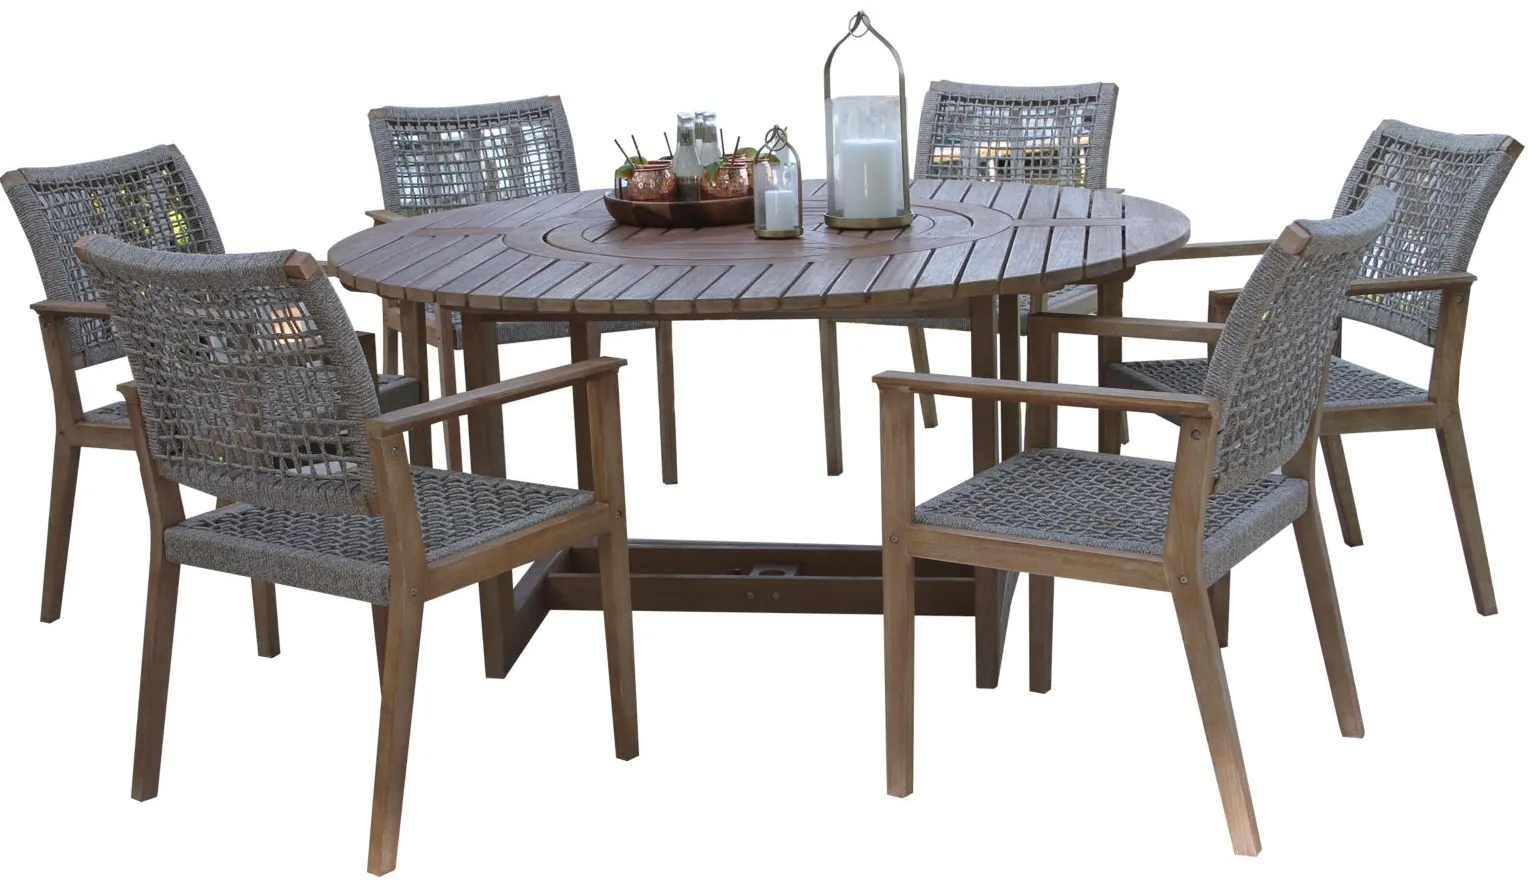 Nautical 7 pc. Lazy Susan Table with Rope Chairs in Wheat by Outdoor Interiors